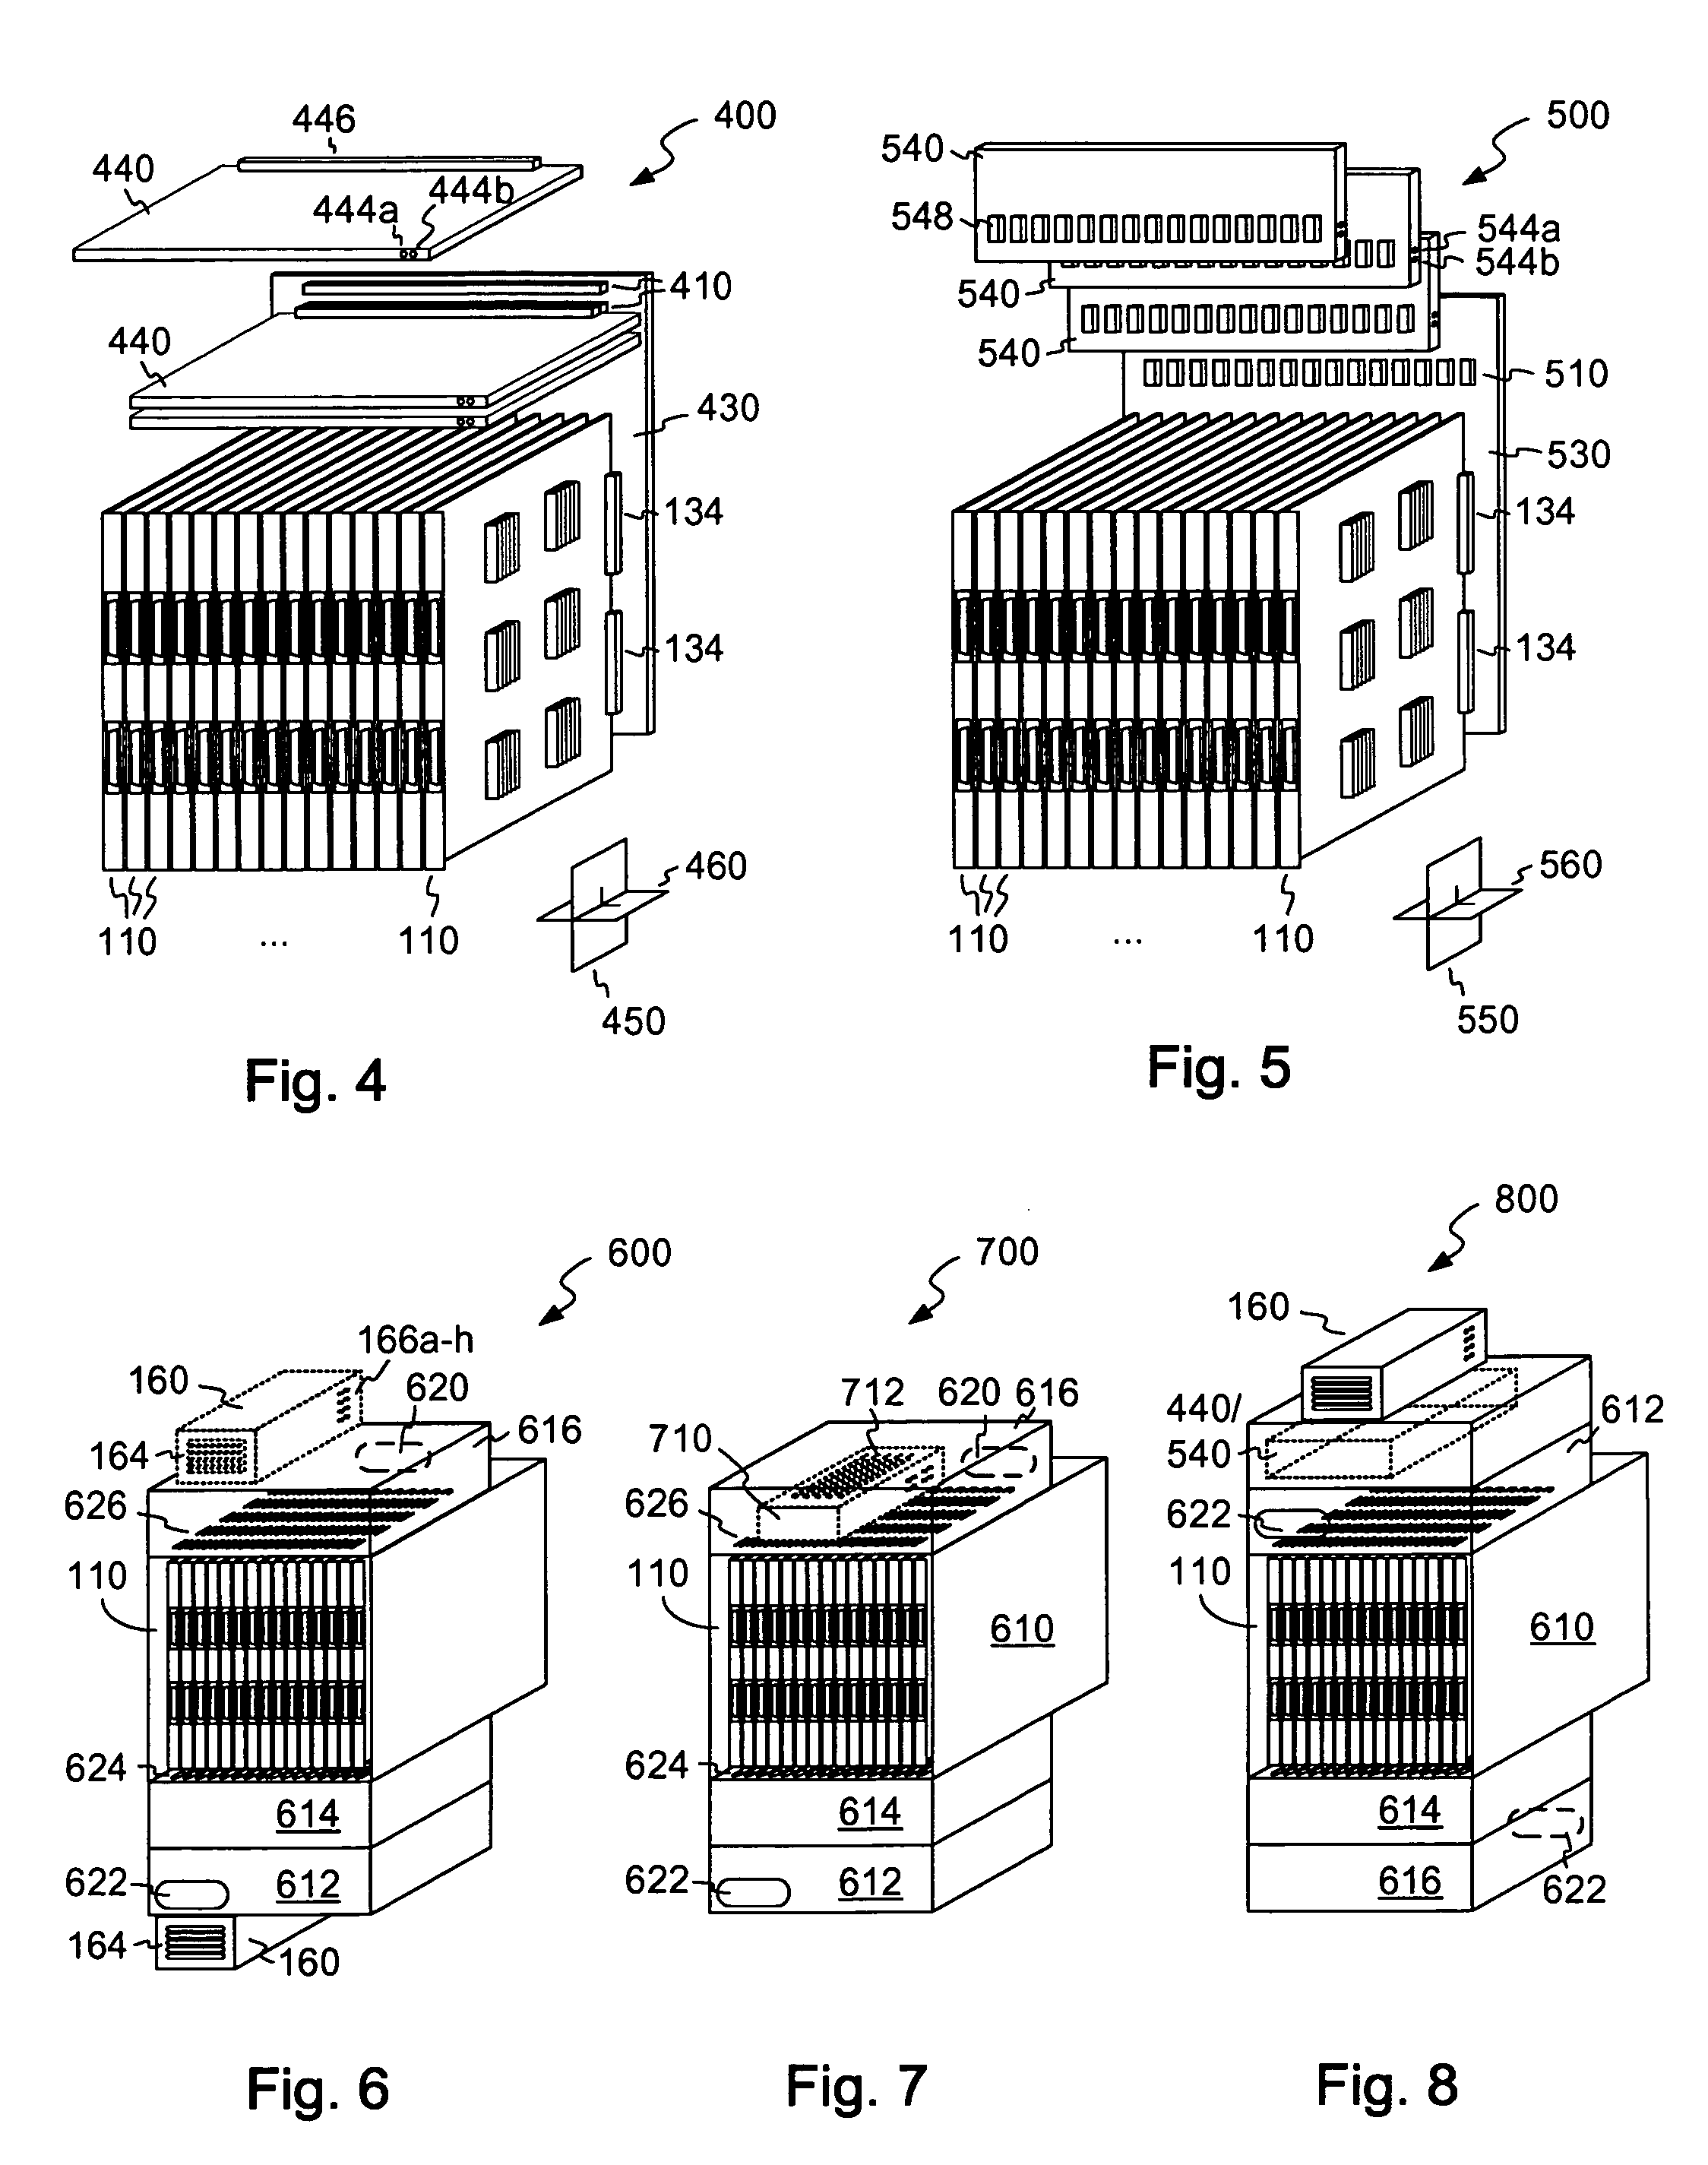 Electronic system with non-parallel arrays of circuit card assemblies